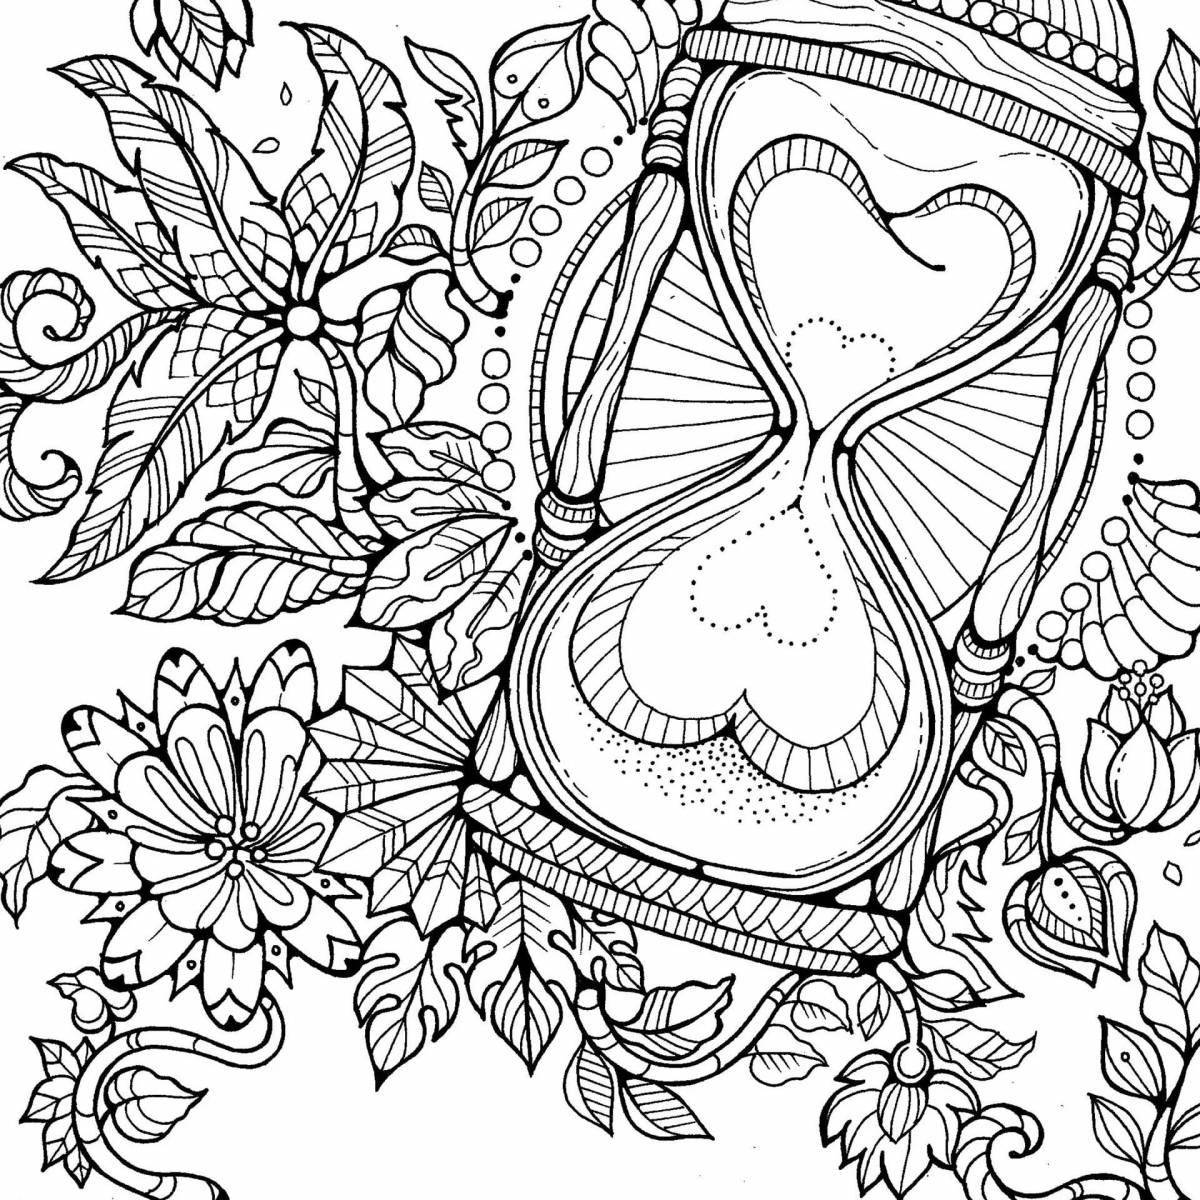 Adorable simple coloring book for adults